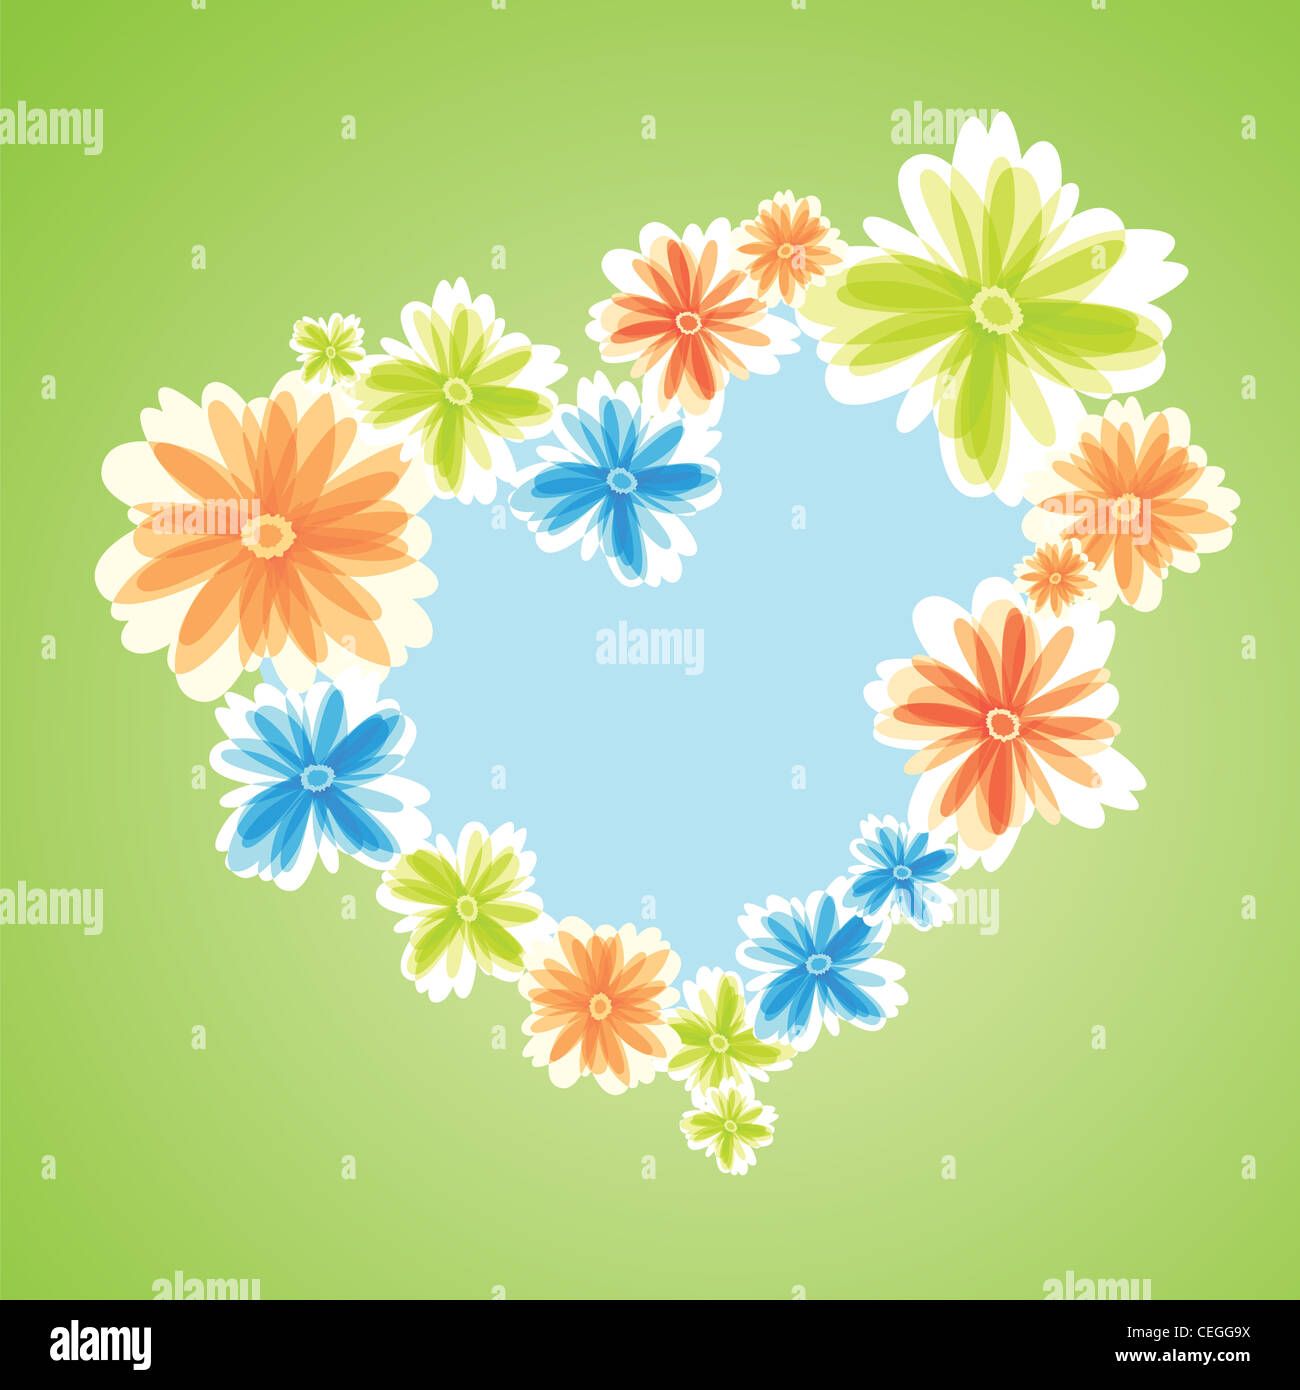 Colored Flowers as heart symbol on green background. Stock Photo